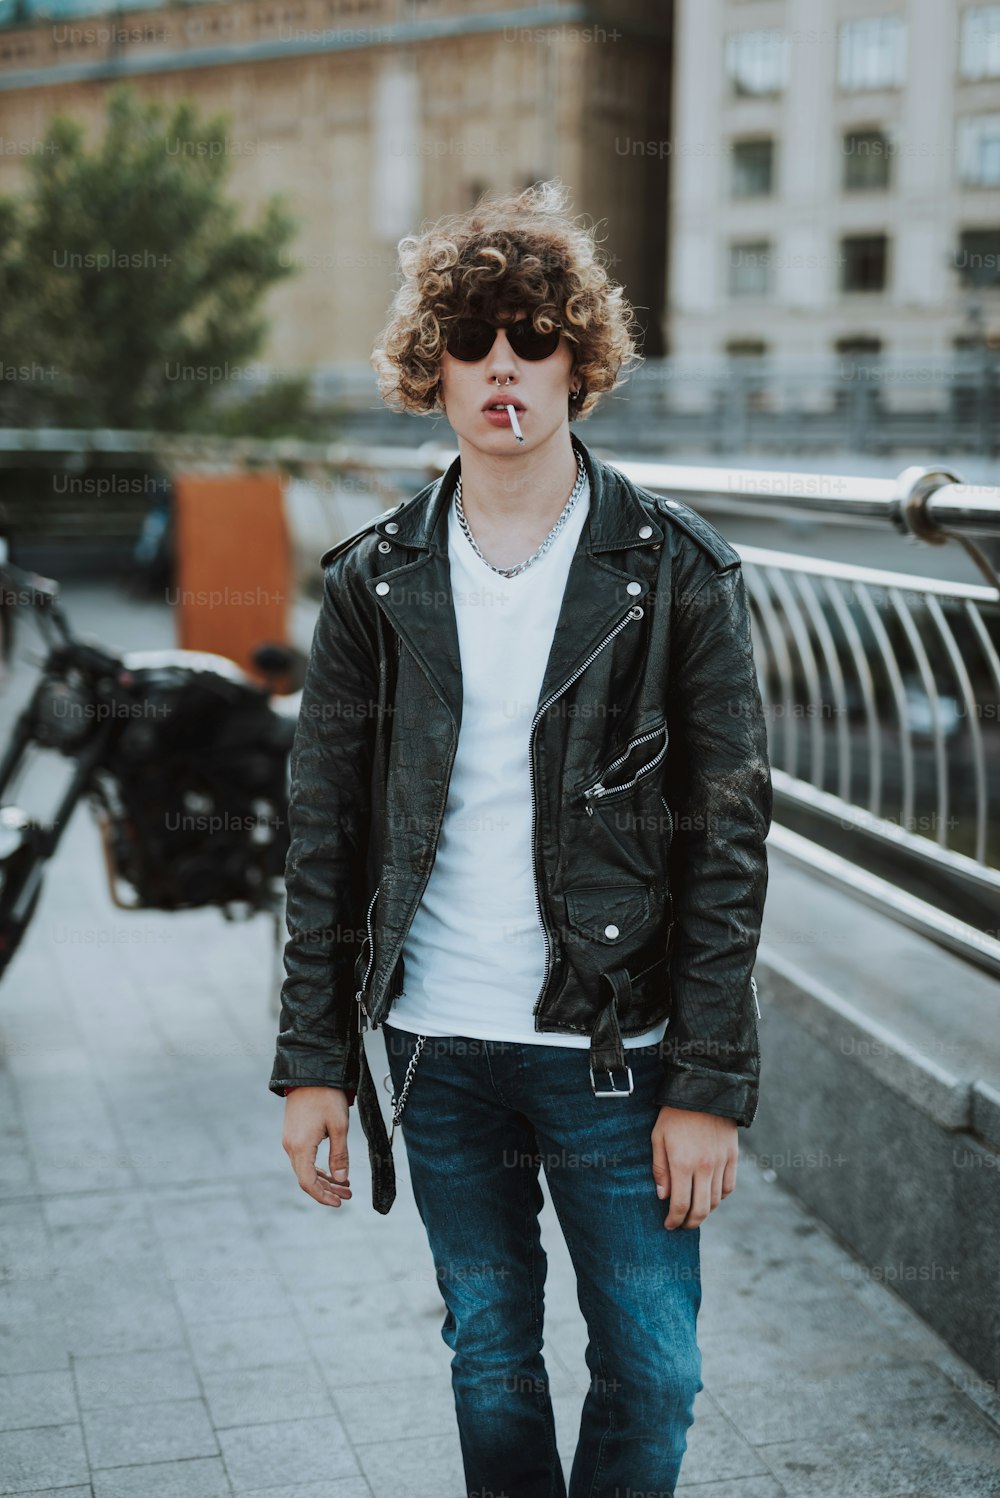 Calm young curly man in street style leather jacket walking and smoking